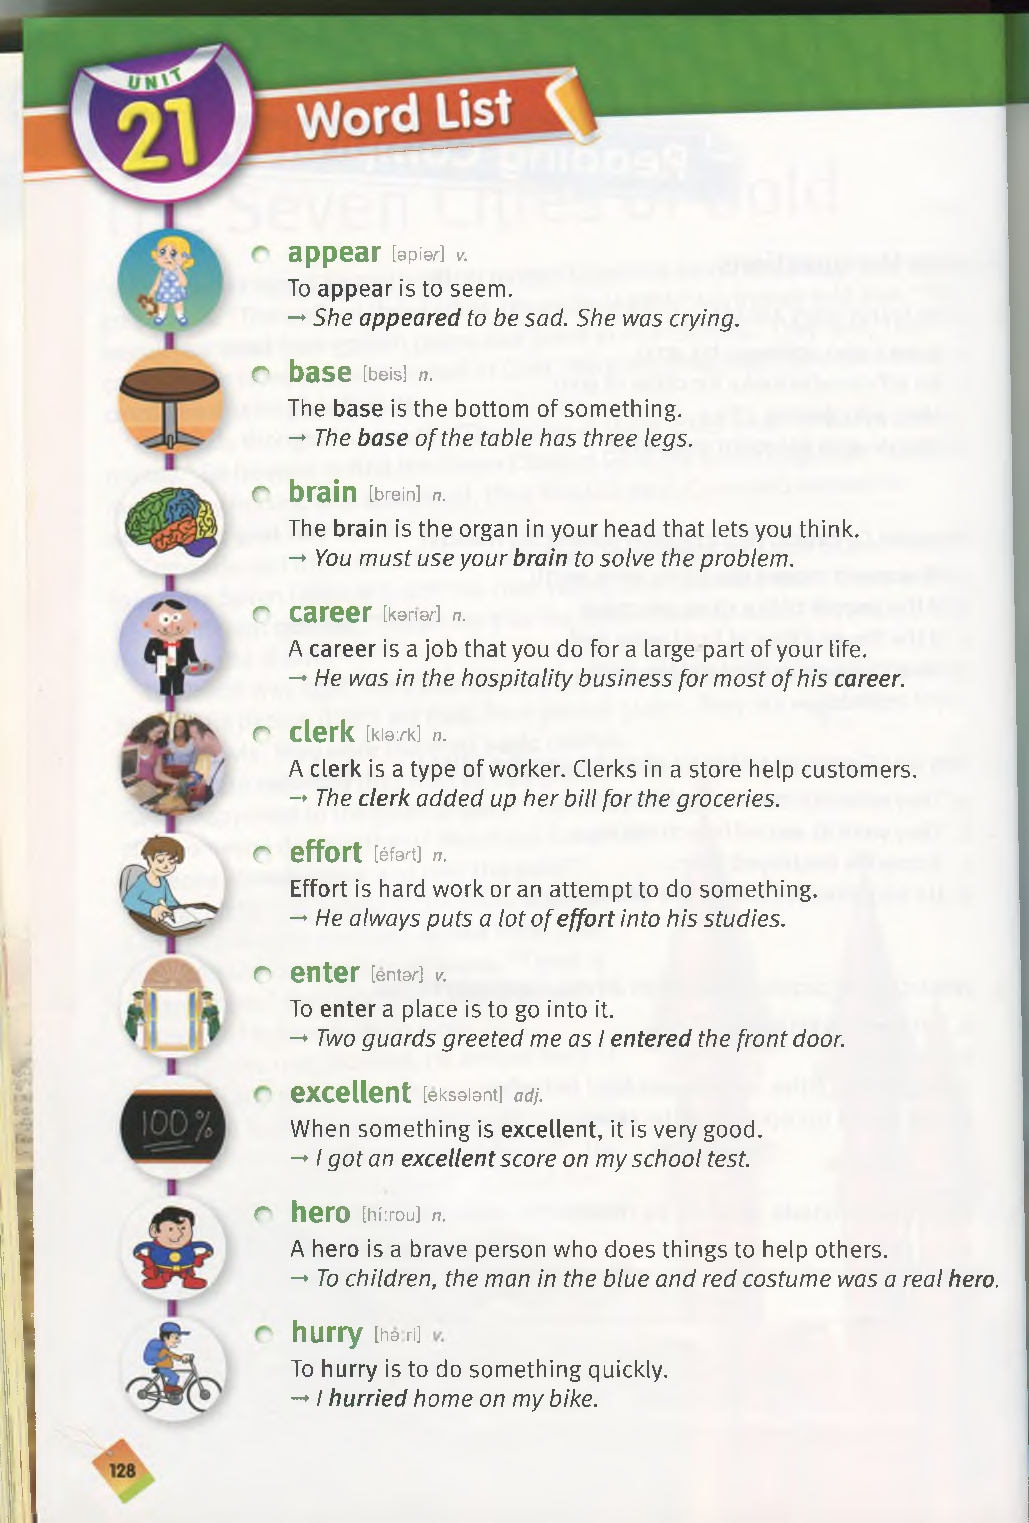 book 4000 essential english words 1 - Unit 21 - Word List & Exercise